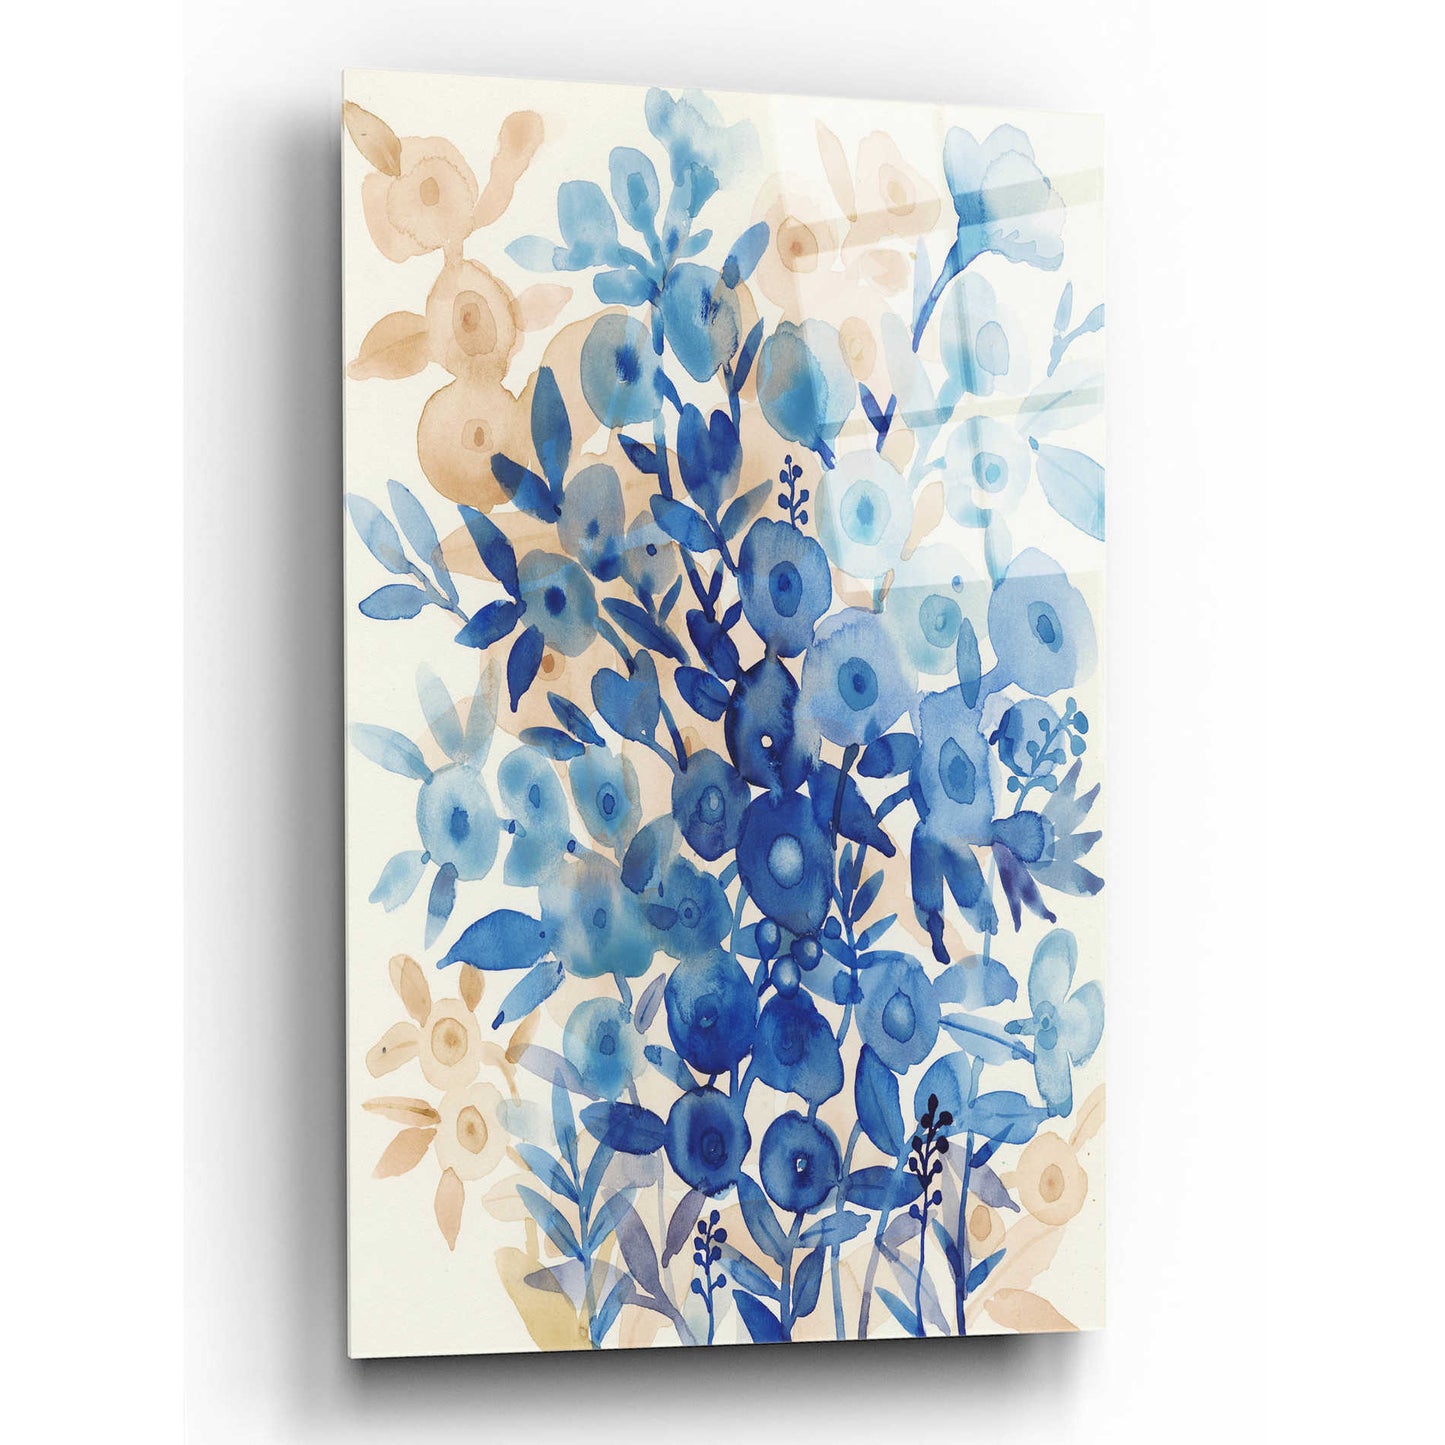 Epic Art 'Blueberry Floral II' by Tim O'Toole, Acrylic Glass Wall Art